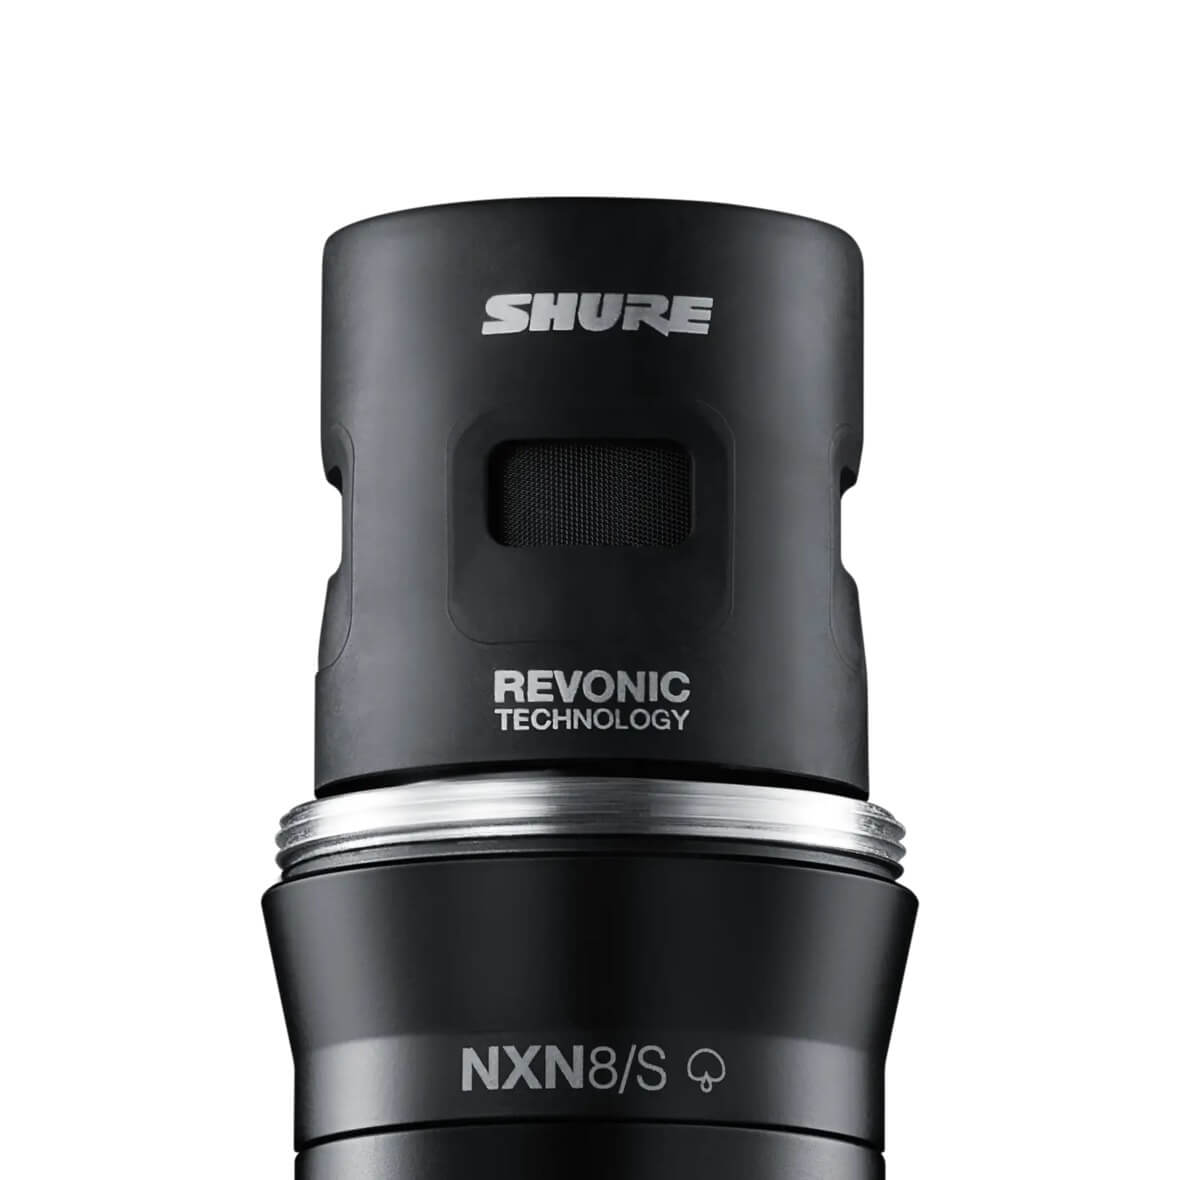 Shure Nexadyne 8/S - Supercardioid Dynamic Vocal Microphone, with Revonic dual-engine transducer technology